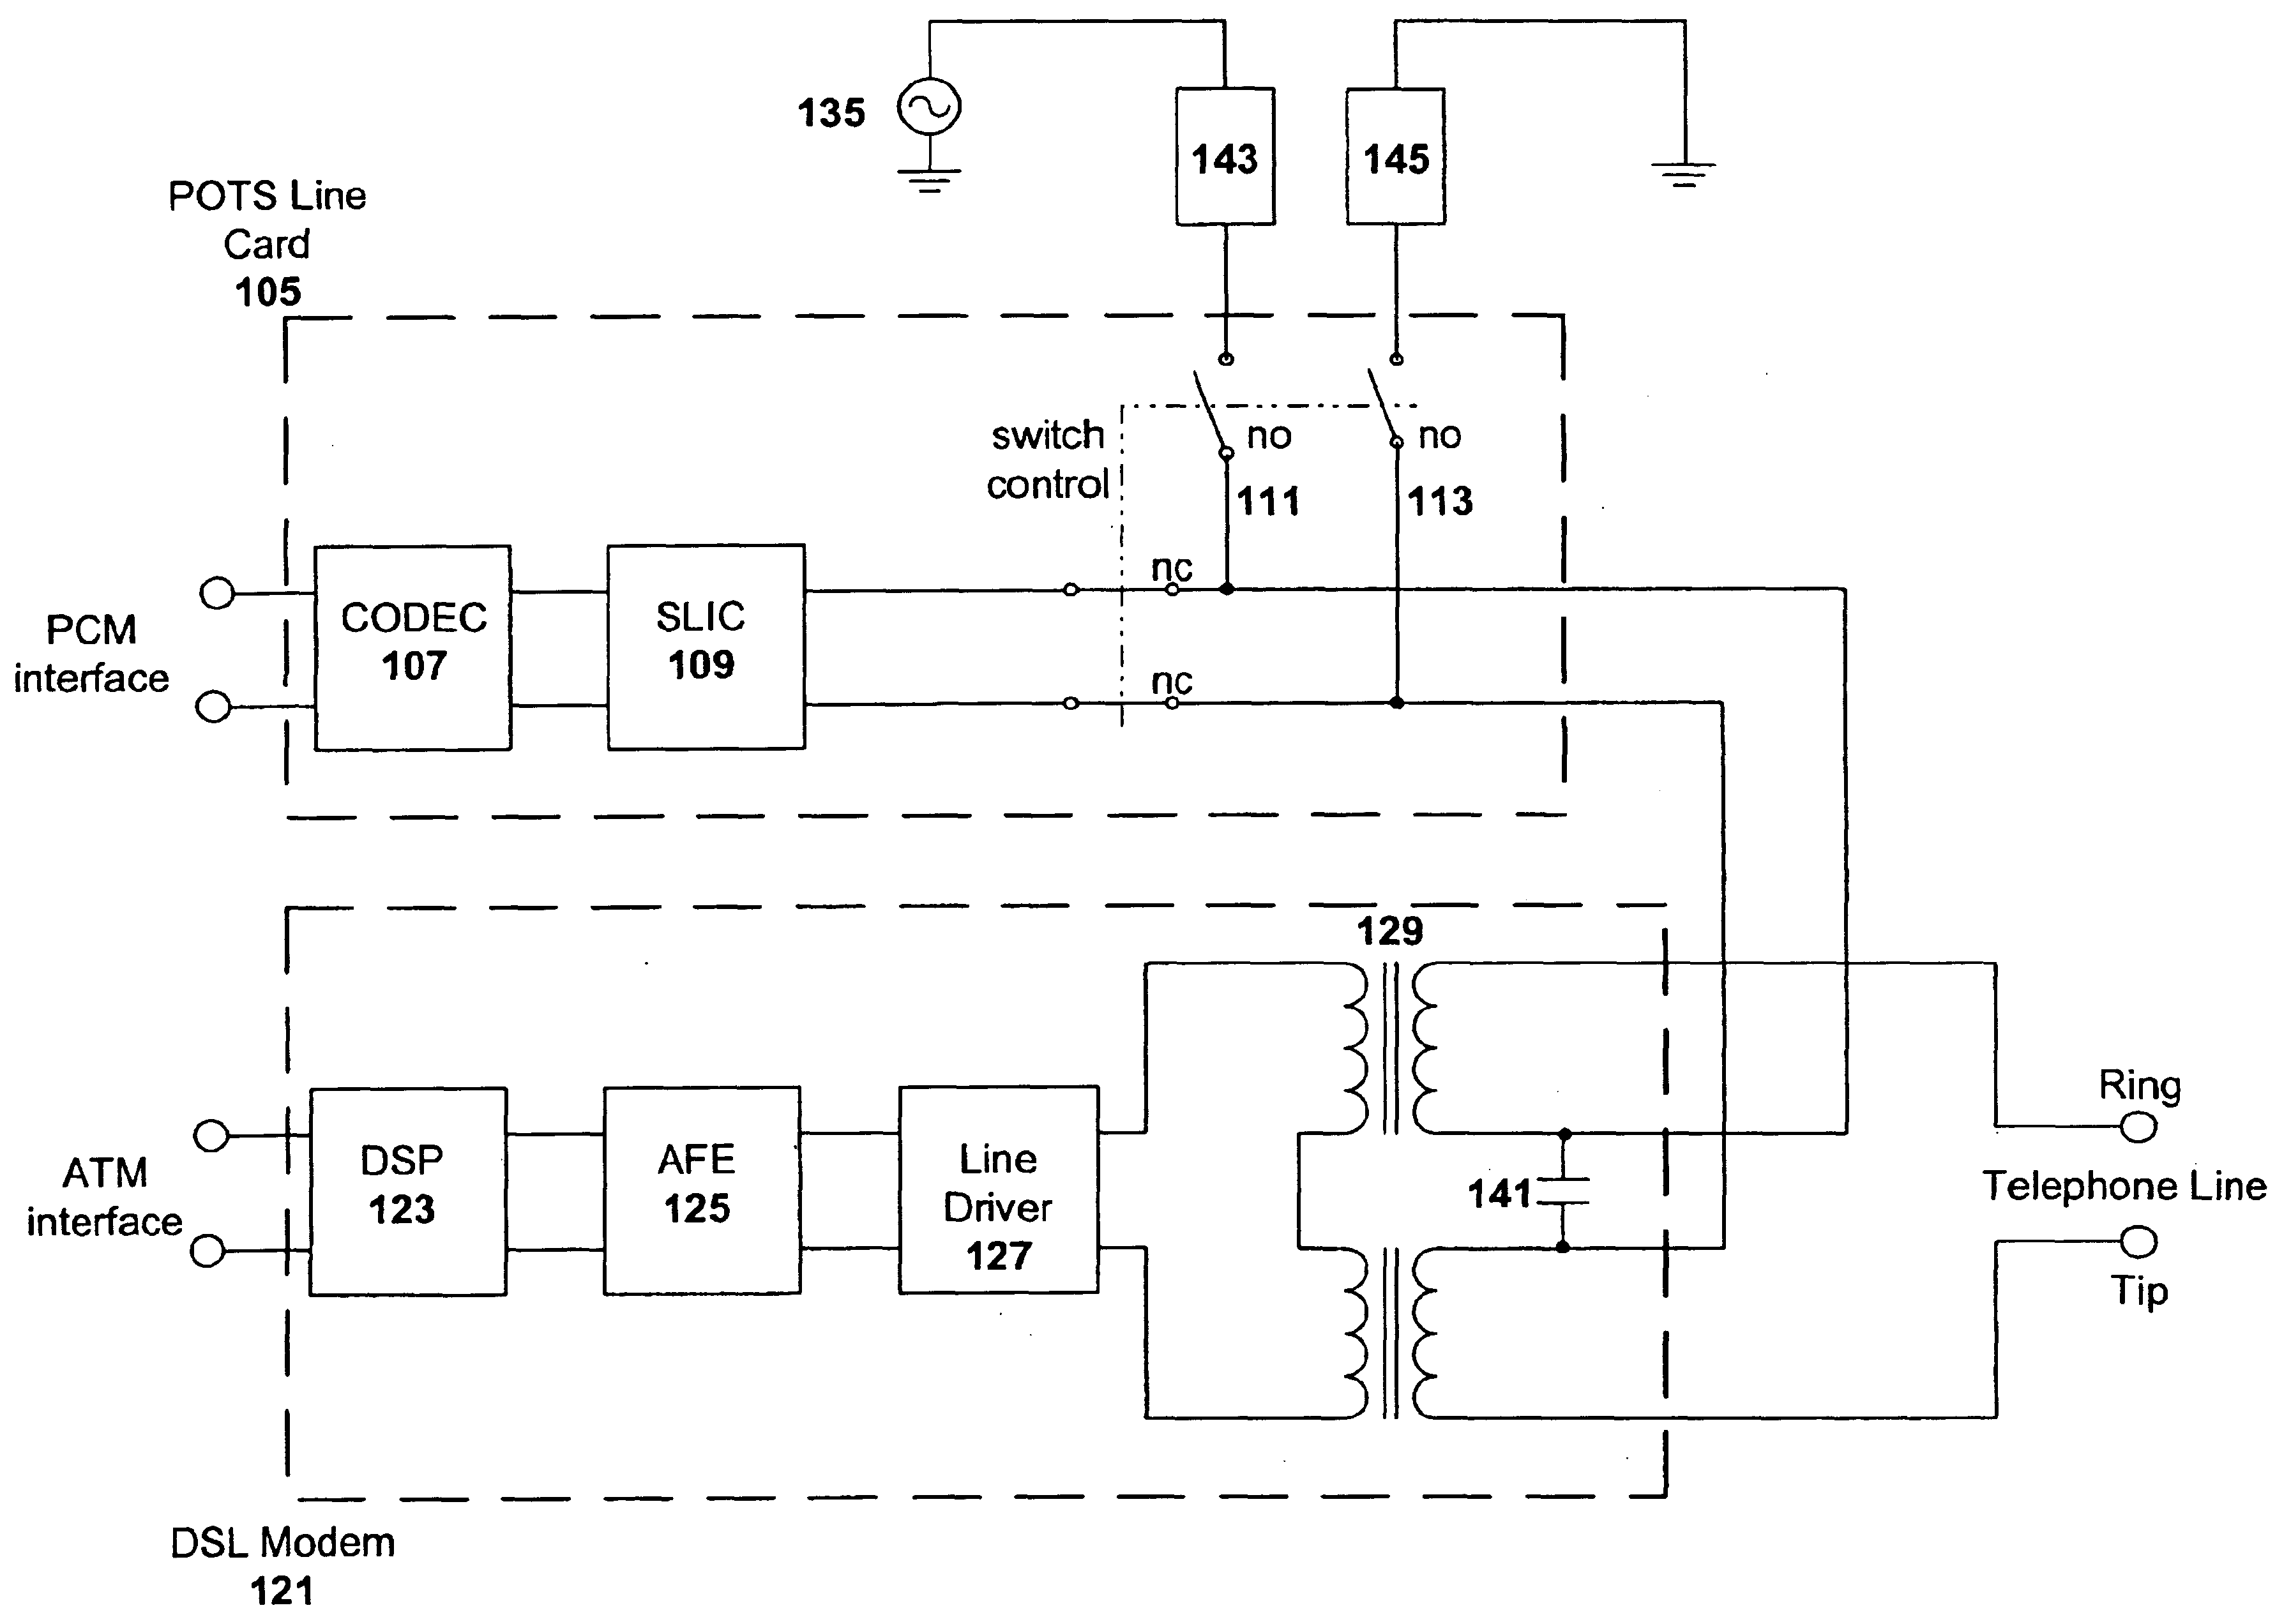 Central office interface techniques for digital subscriber lines